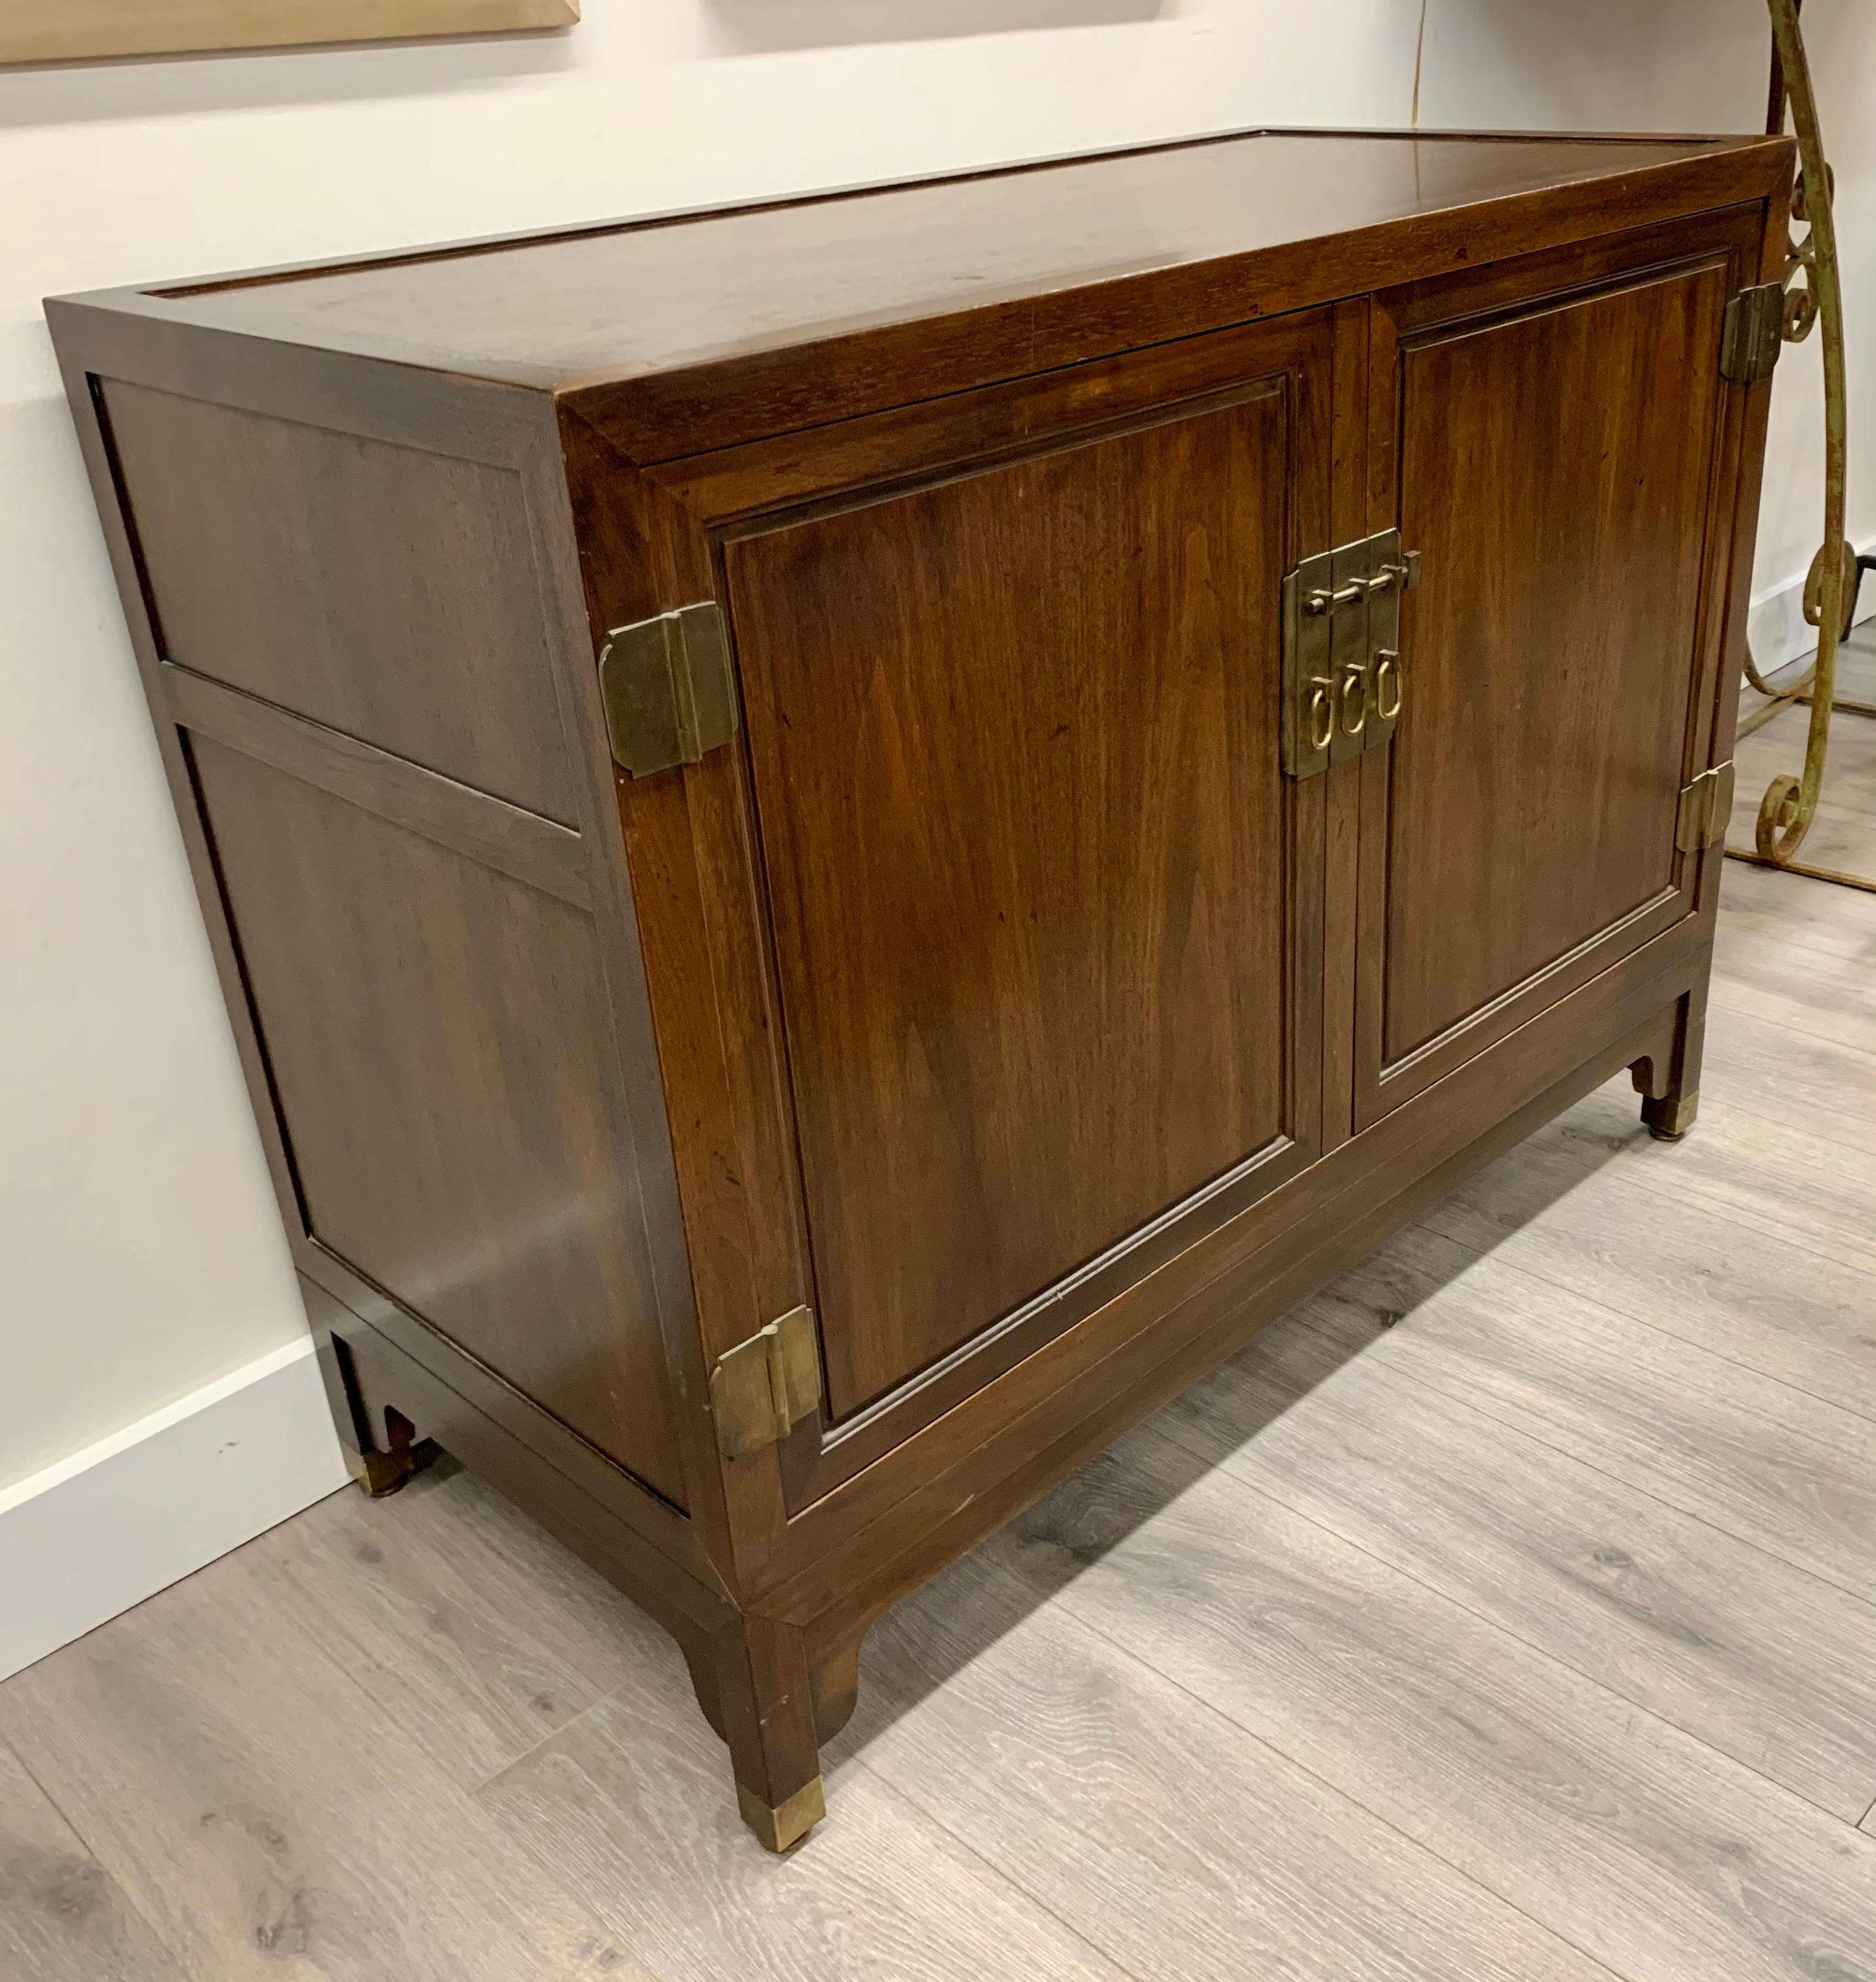 Baker Furniture walnut sideboard cabinet with great scale and better lines.
Baker Furniture is one of the great furniture makers in the world. Multi-purpose
utilization - the opportunities are many. Now, more than ever, home is where the